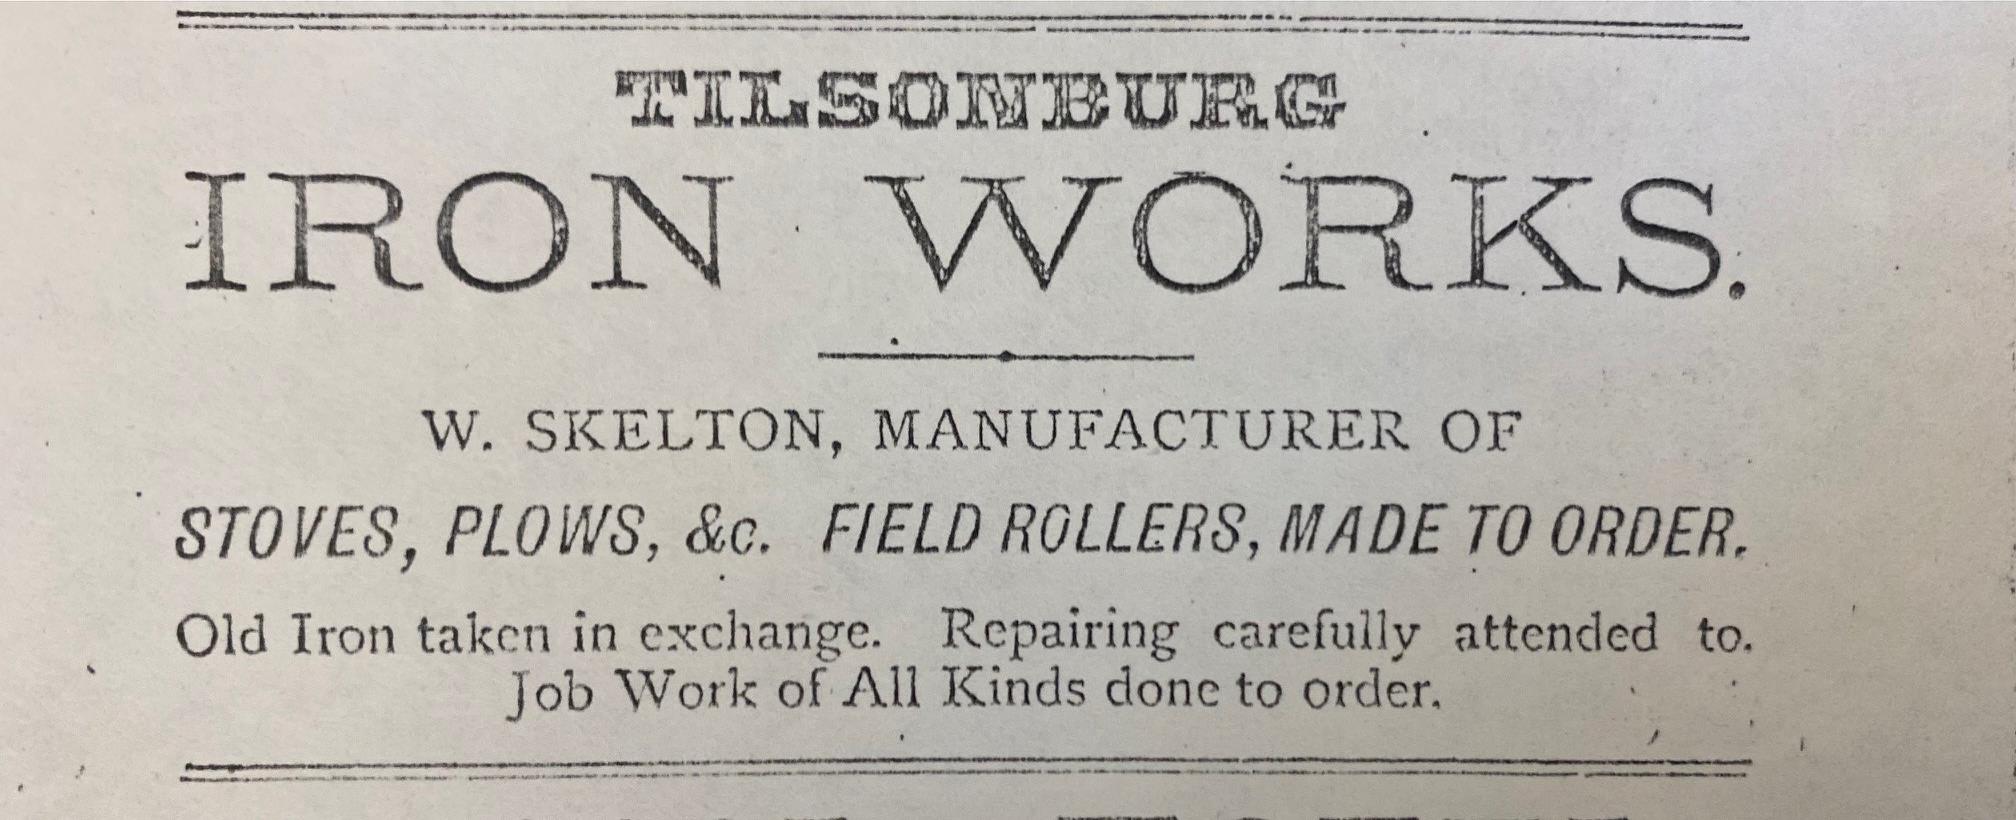 Advertisement for the Iron Works, text: 